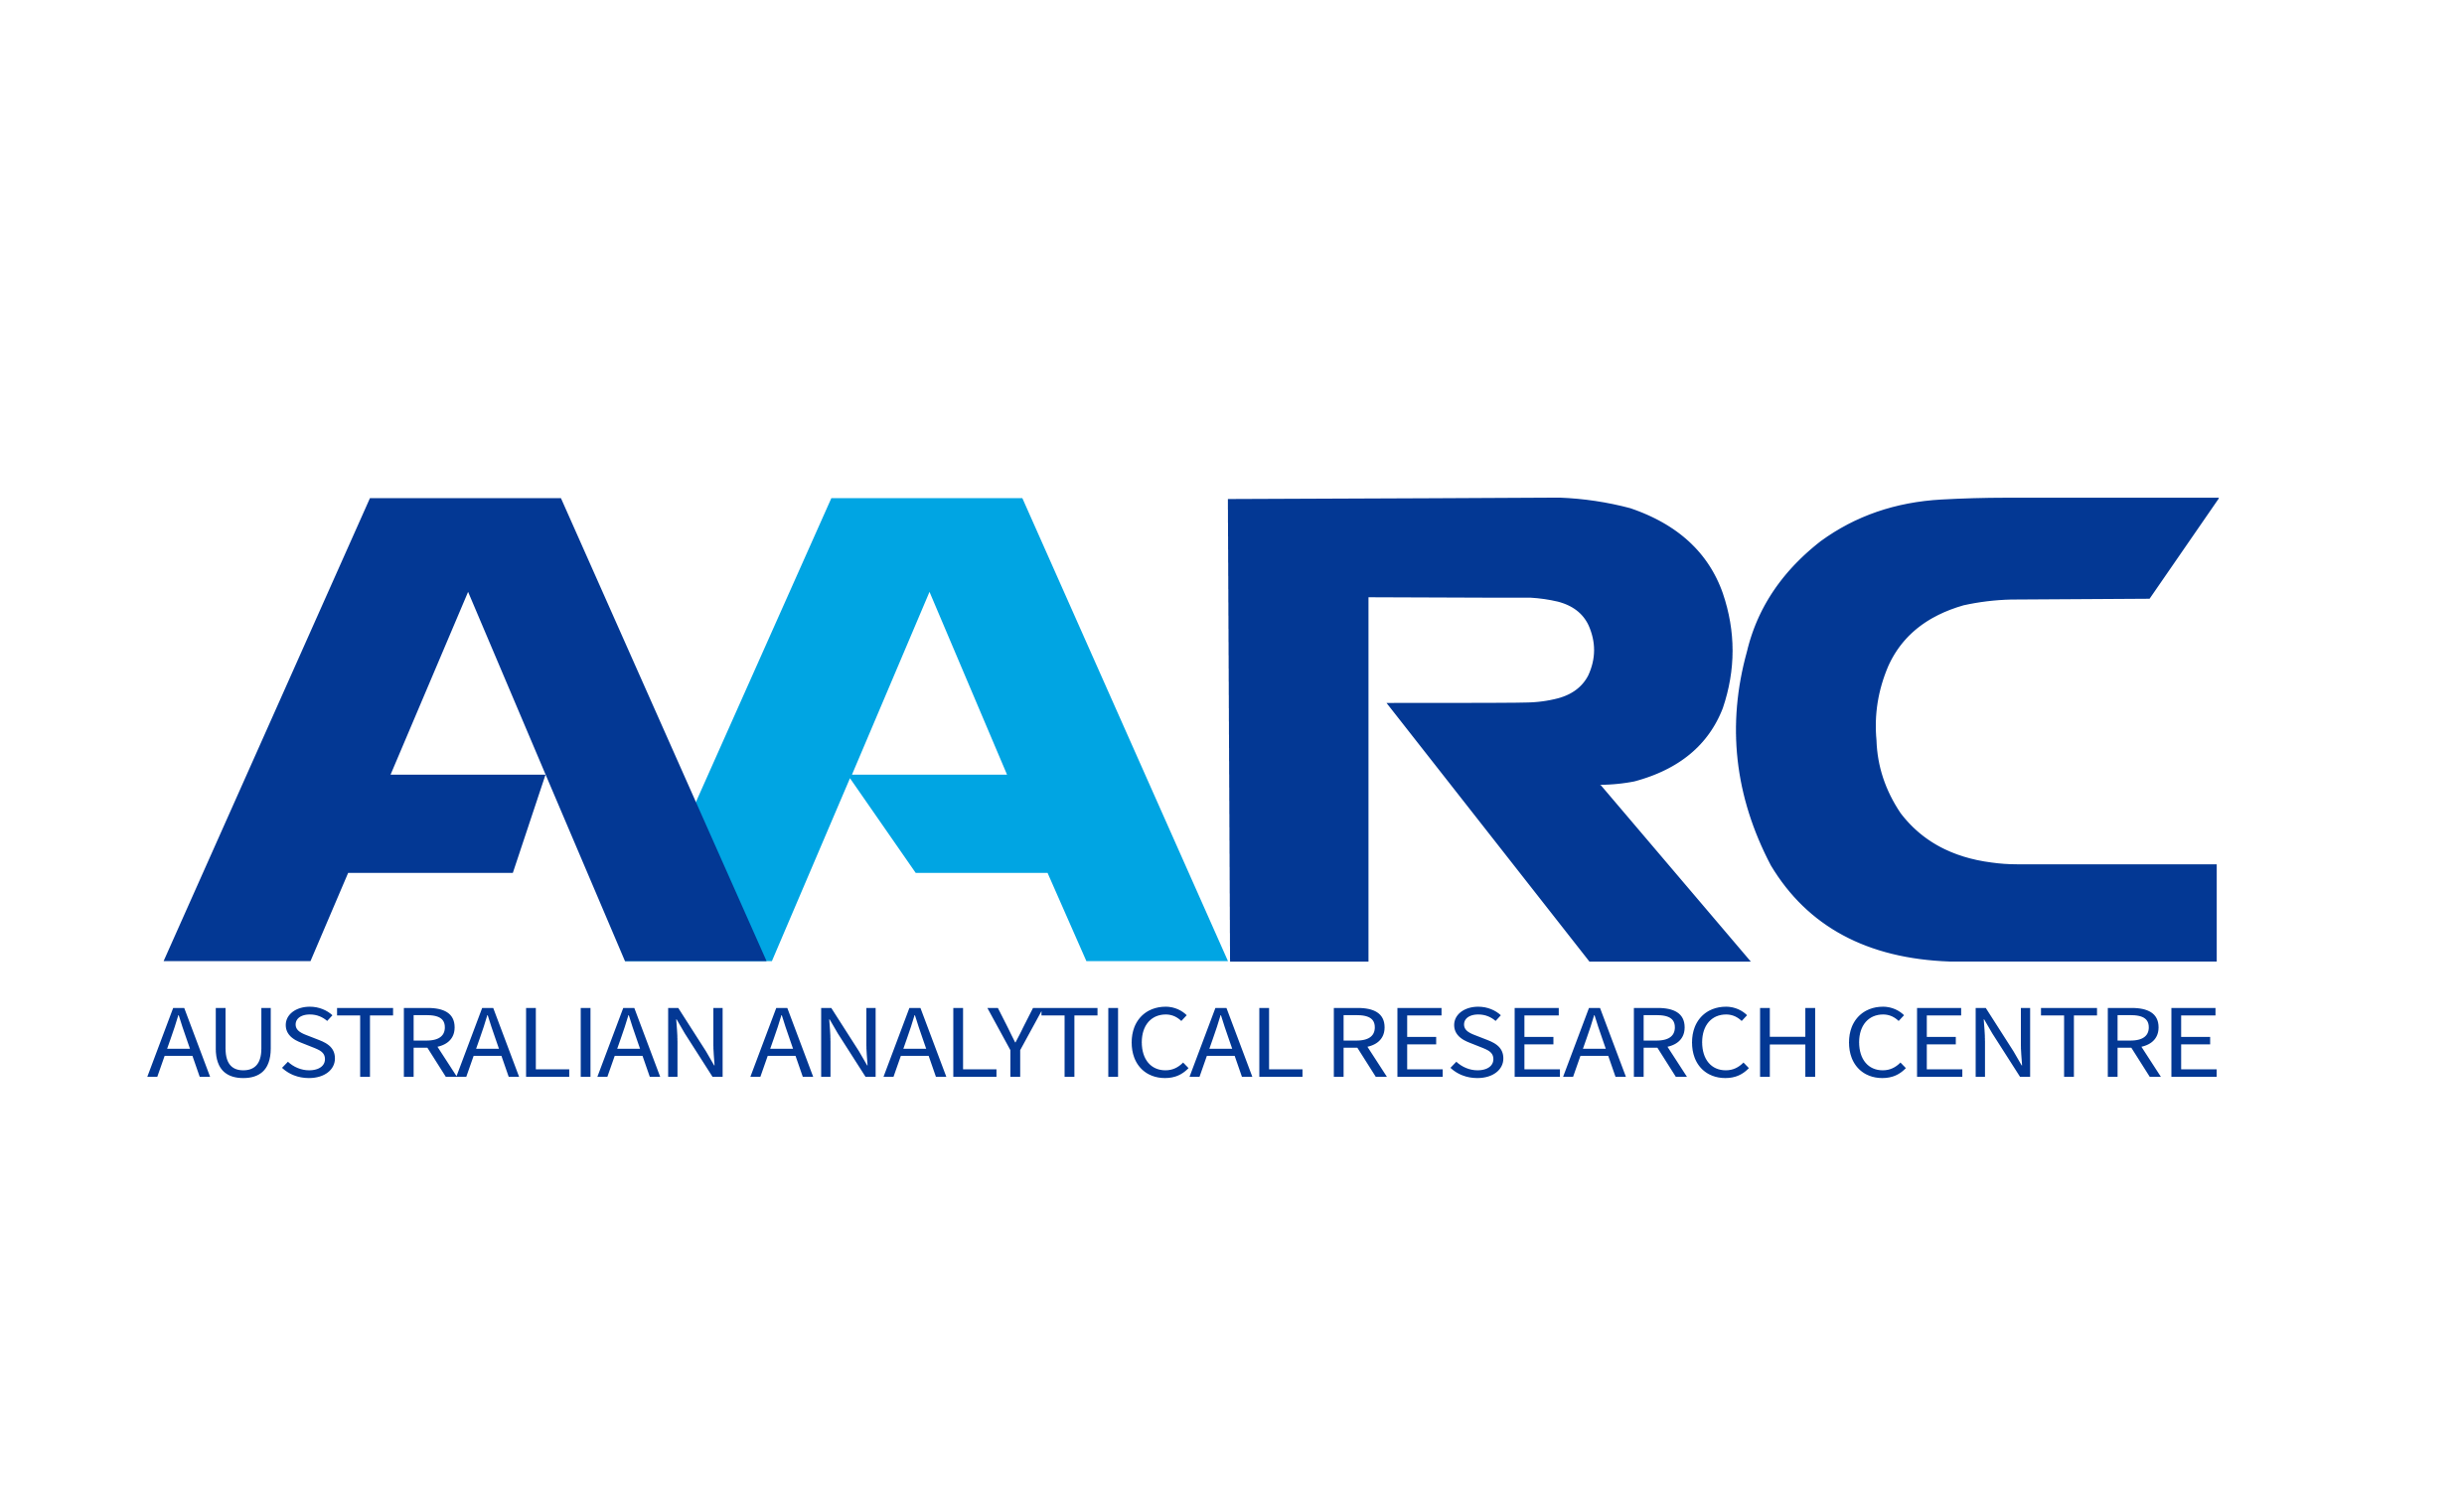 AARC AUSTRALIAN ANALYTICAL RESEARCH CENTRE